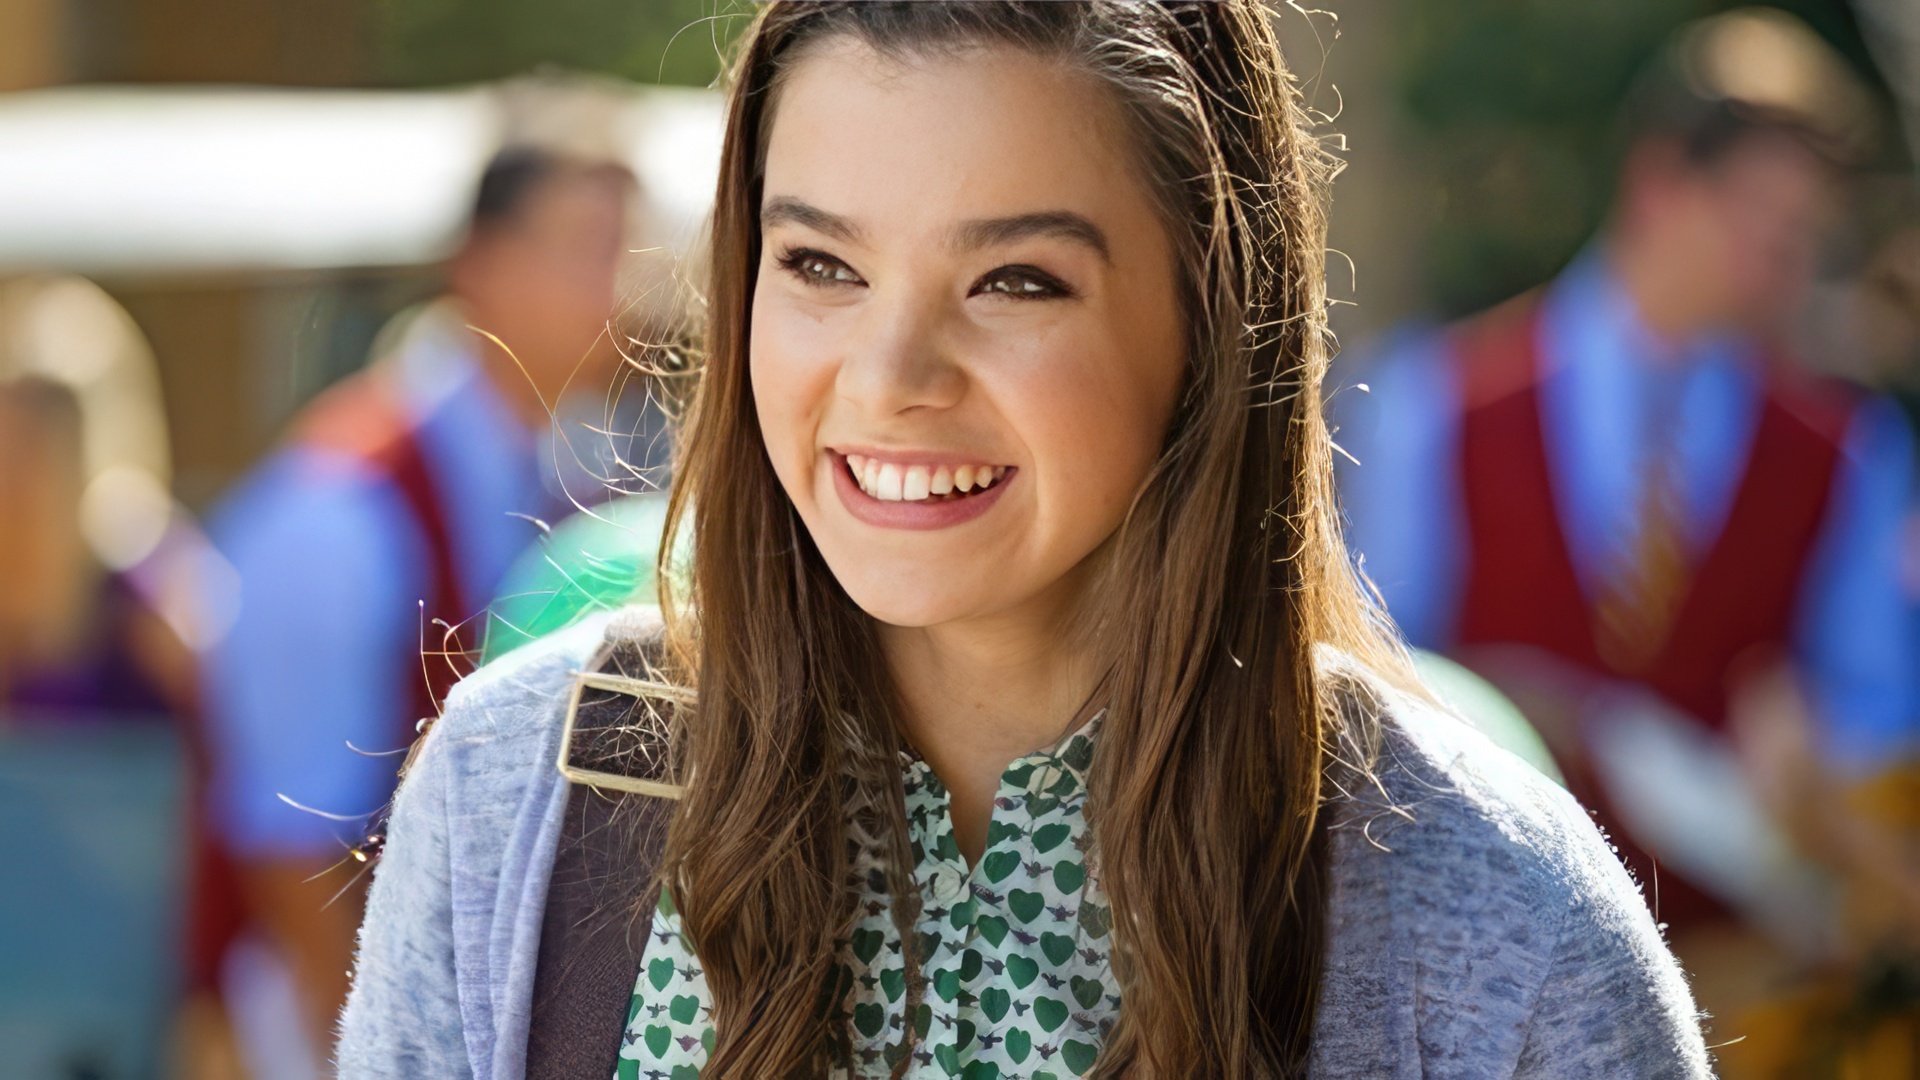 Hailee Steinfeld in the film 'Pitch Perfect 2'